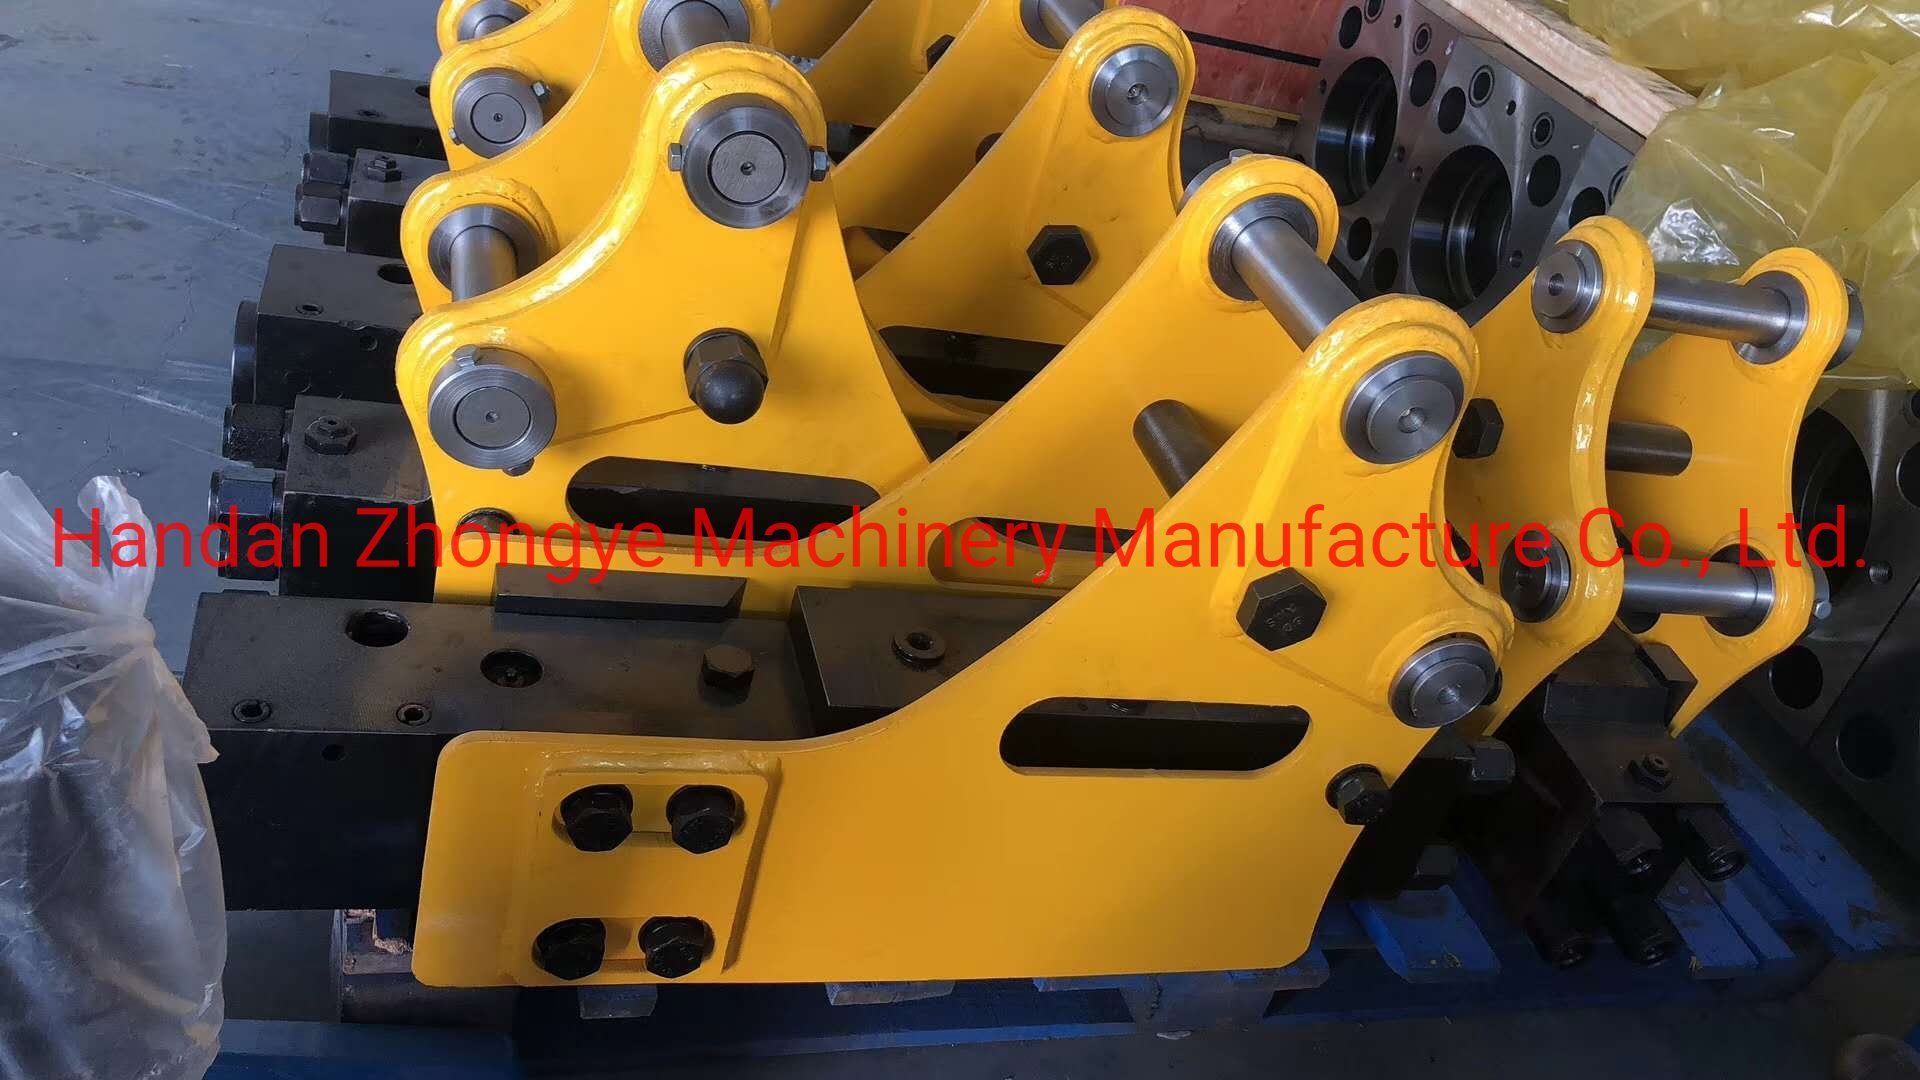 New Fashion Design for Rock Hammer Excavator - Hydraulic Rock Breaker Furukawa Hb30g for 30tons Excavator with Competitive Price – Zhongye